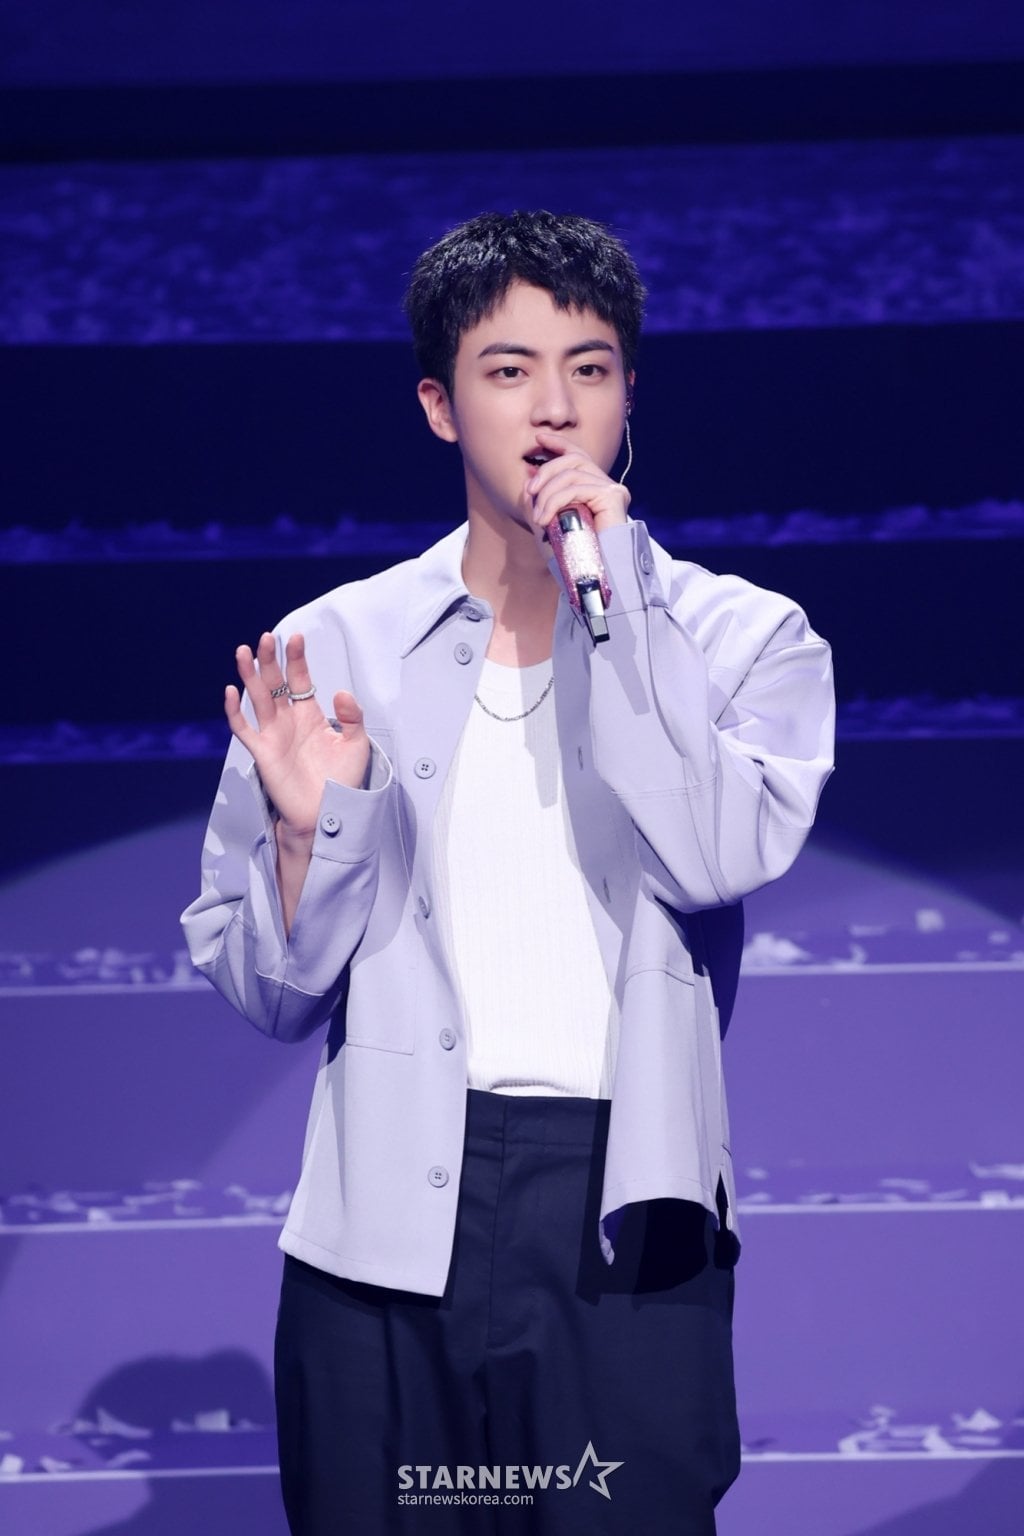 [Star News] [Exclusive] BTS Jin on 1st variety show appearance since being discharged... Goes to a deserted island for 'I'm Glad You Got a Good Rest' - 010724